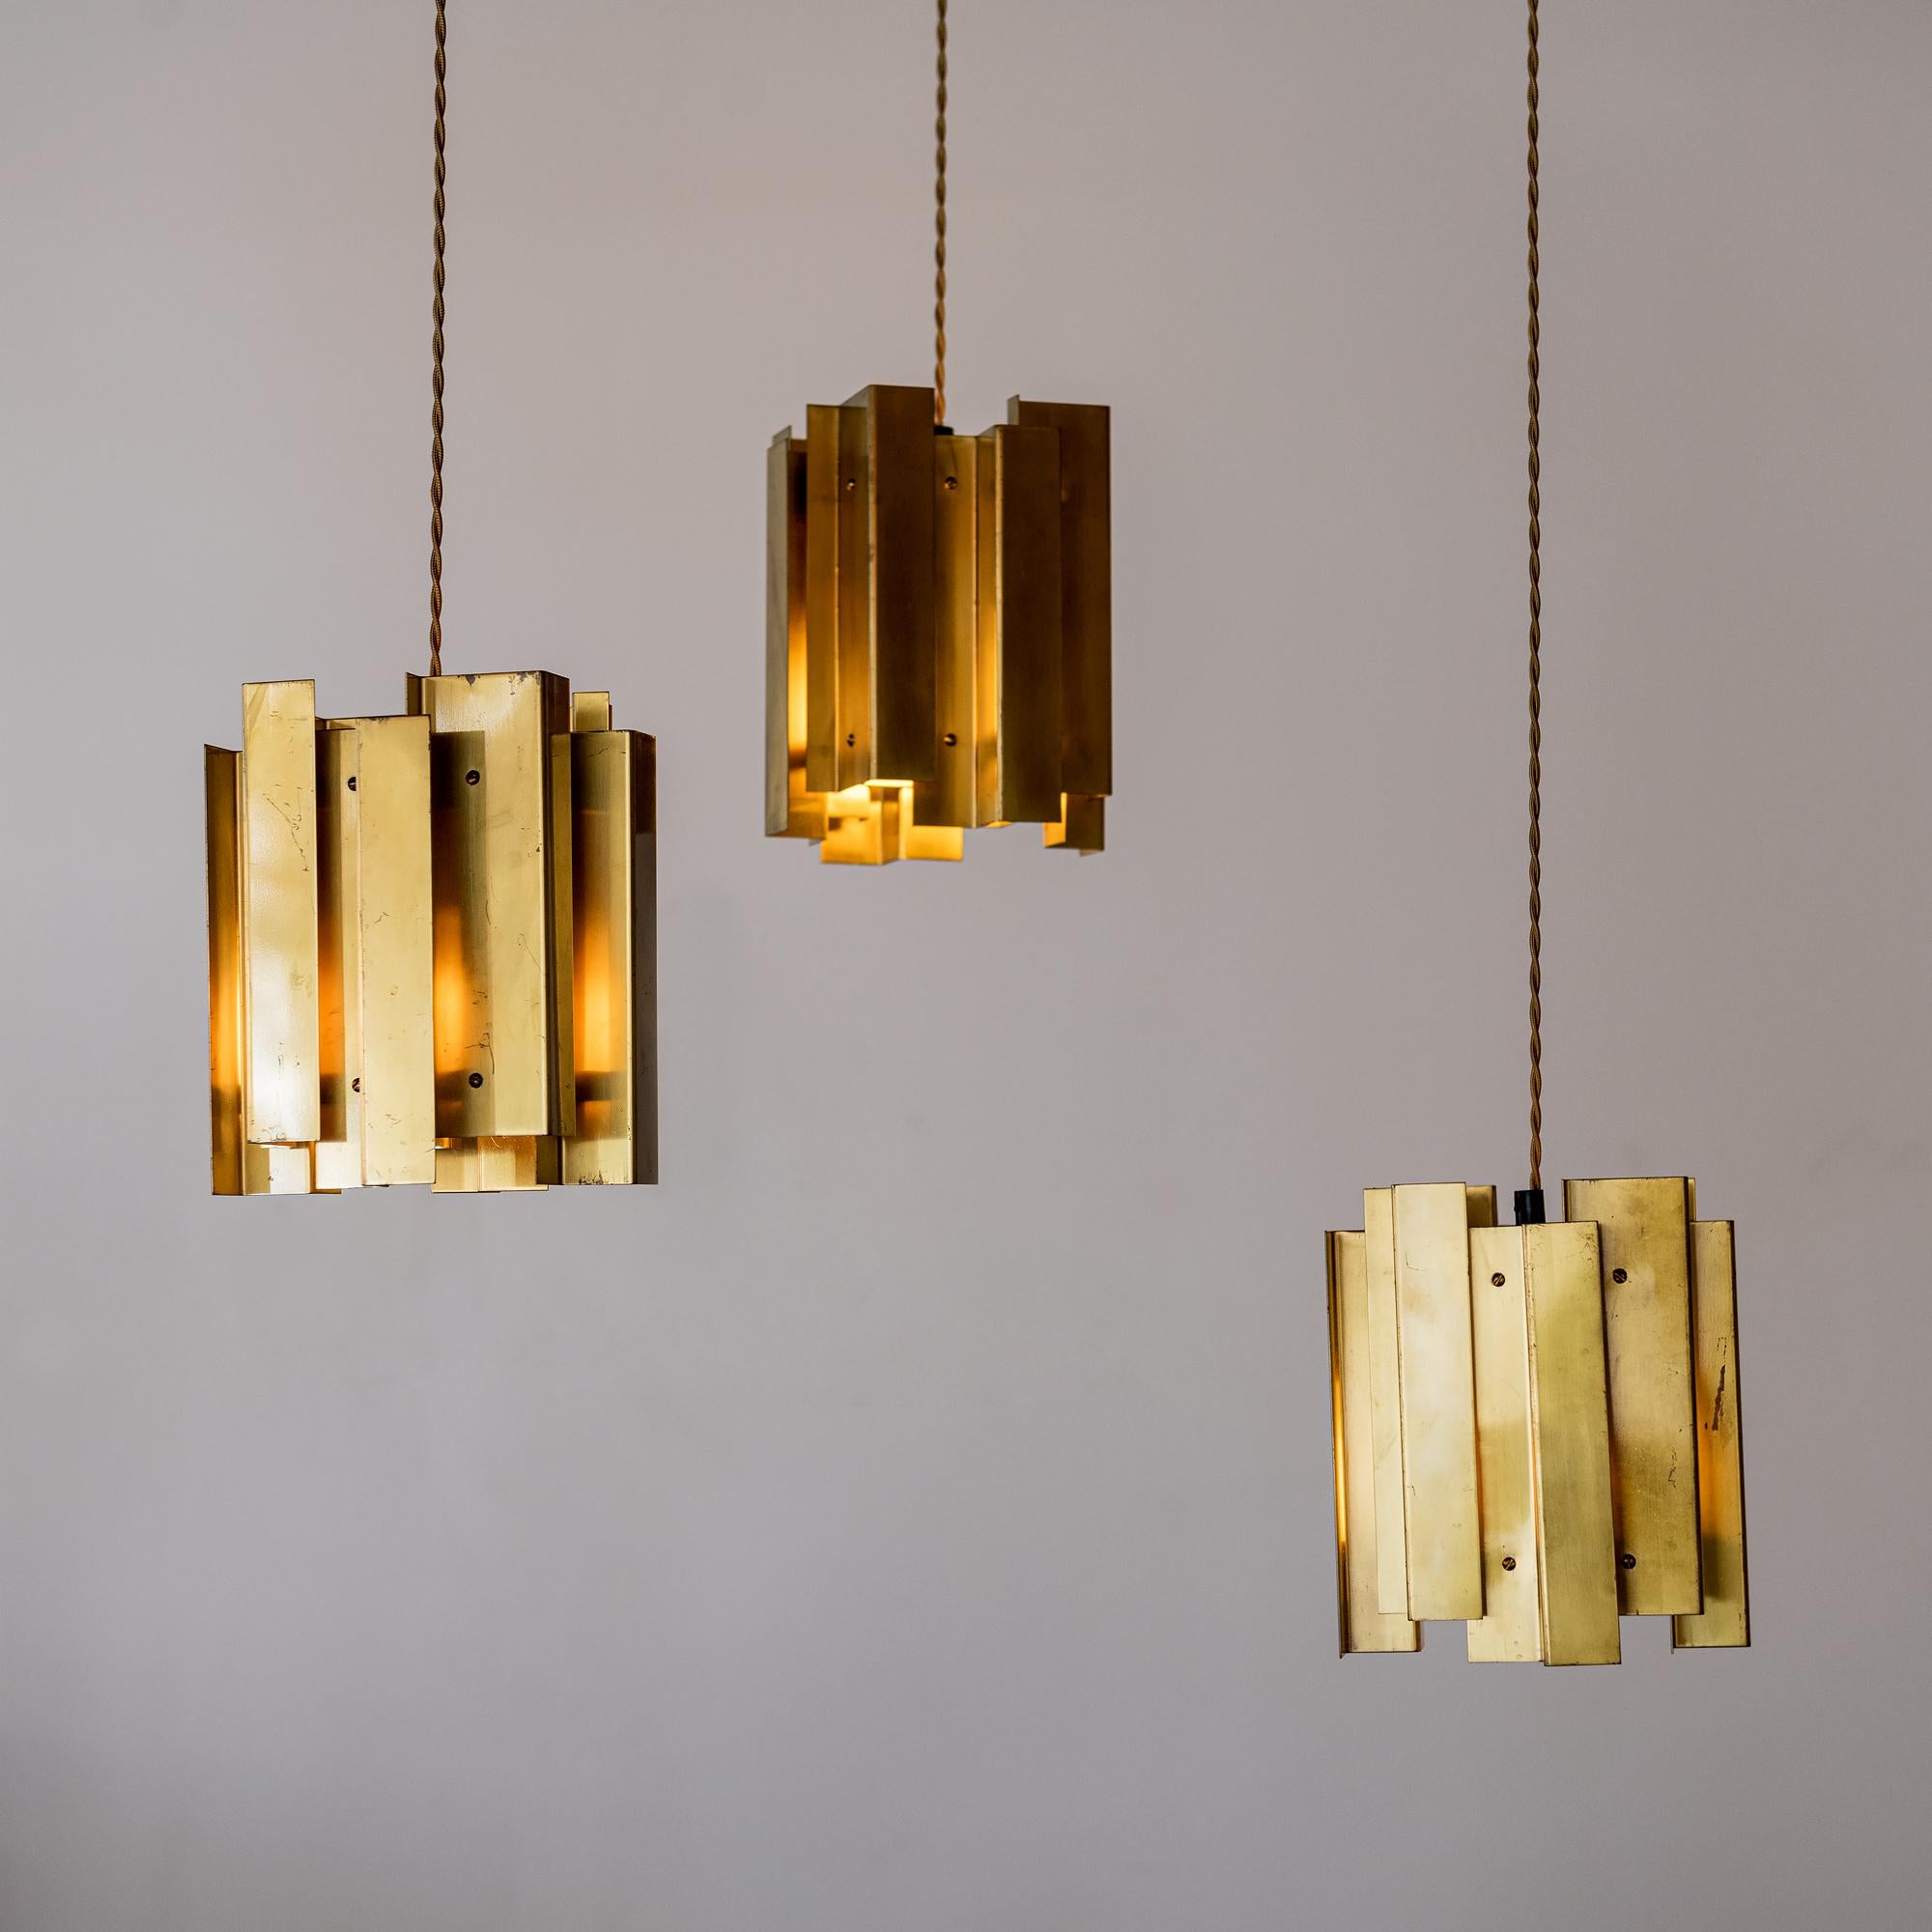 Stunning set of brass pendants by Carl Axel Acking, made-to-order for The Continental Hotel in Stockholm, Sweden, 1940s.

Listed dimensions are for the light fixtures. Drop is adjustable as desired.